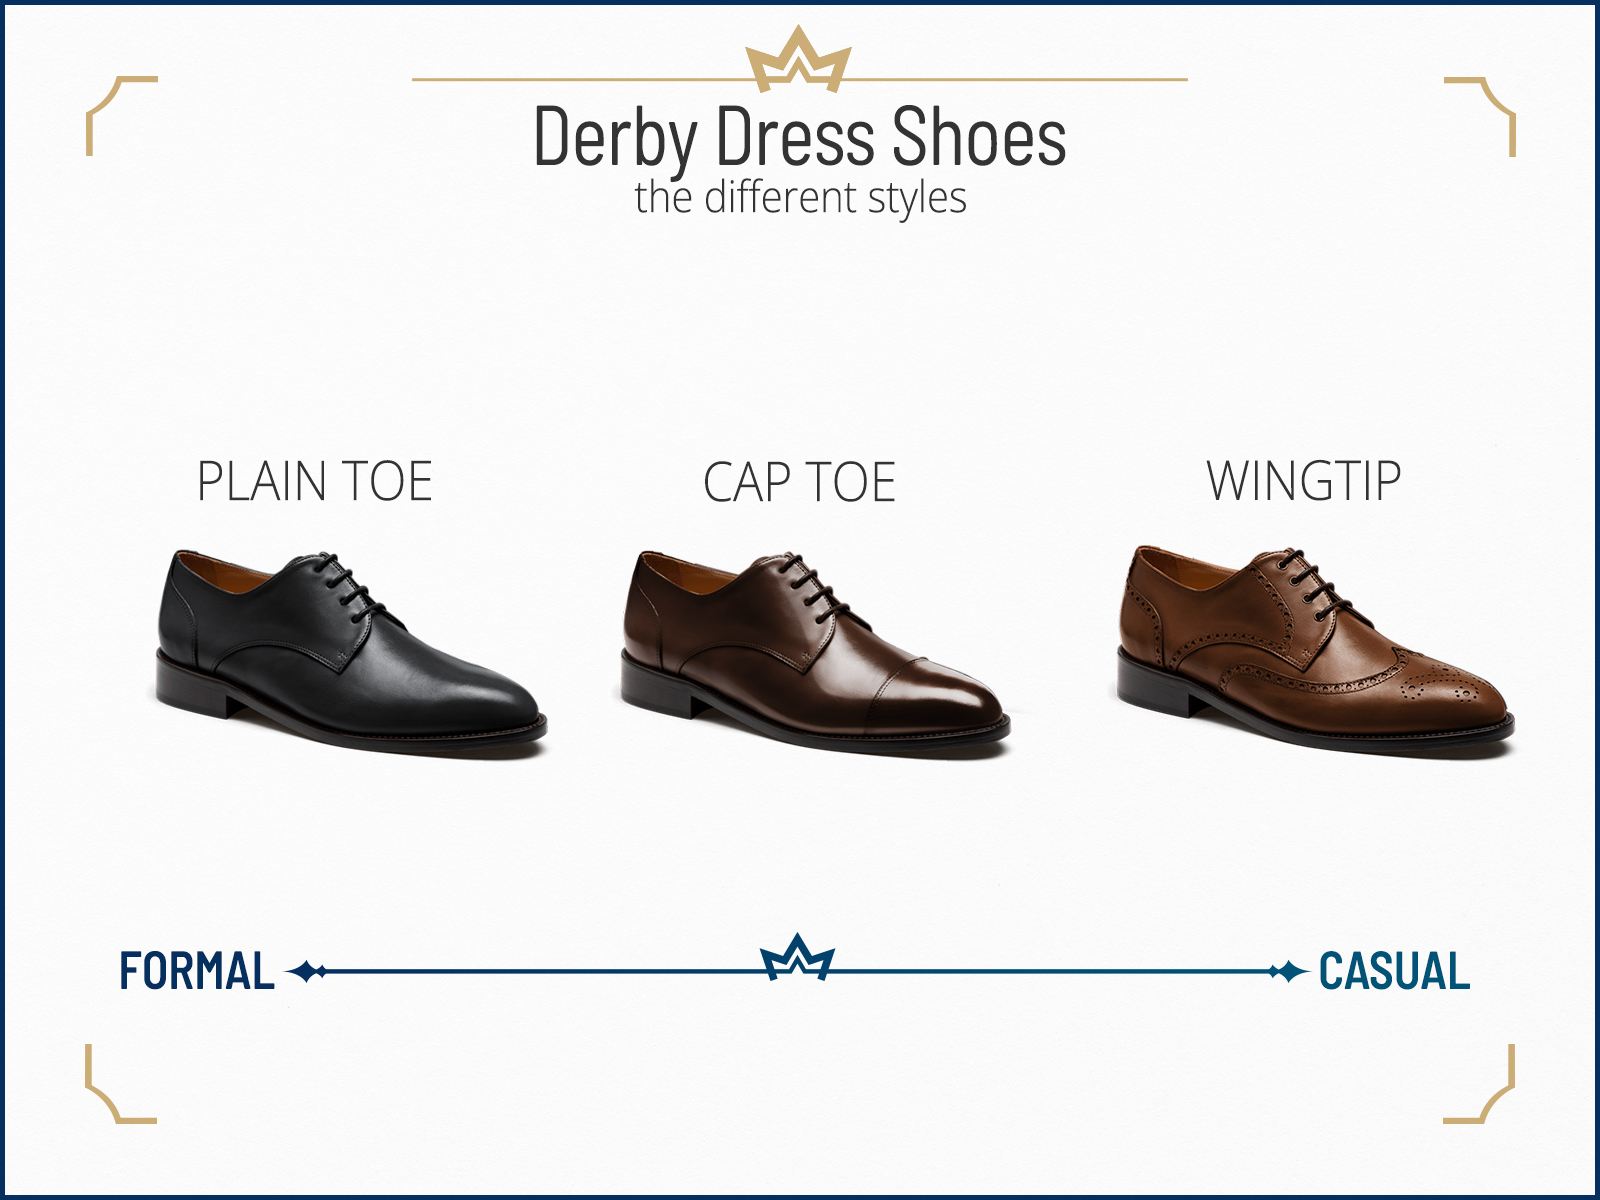 Different derby dress shoes: types and formality: : plain toe vs. cap toe vs. wingtip